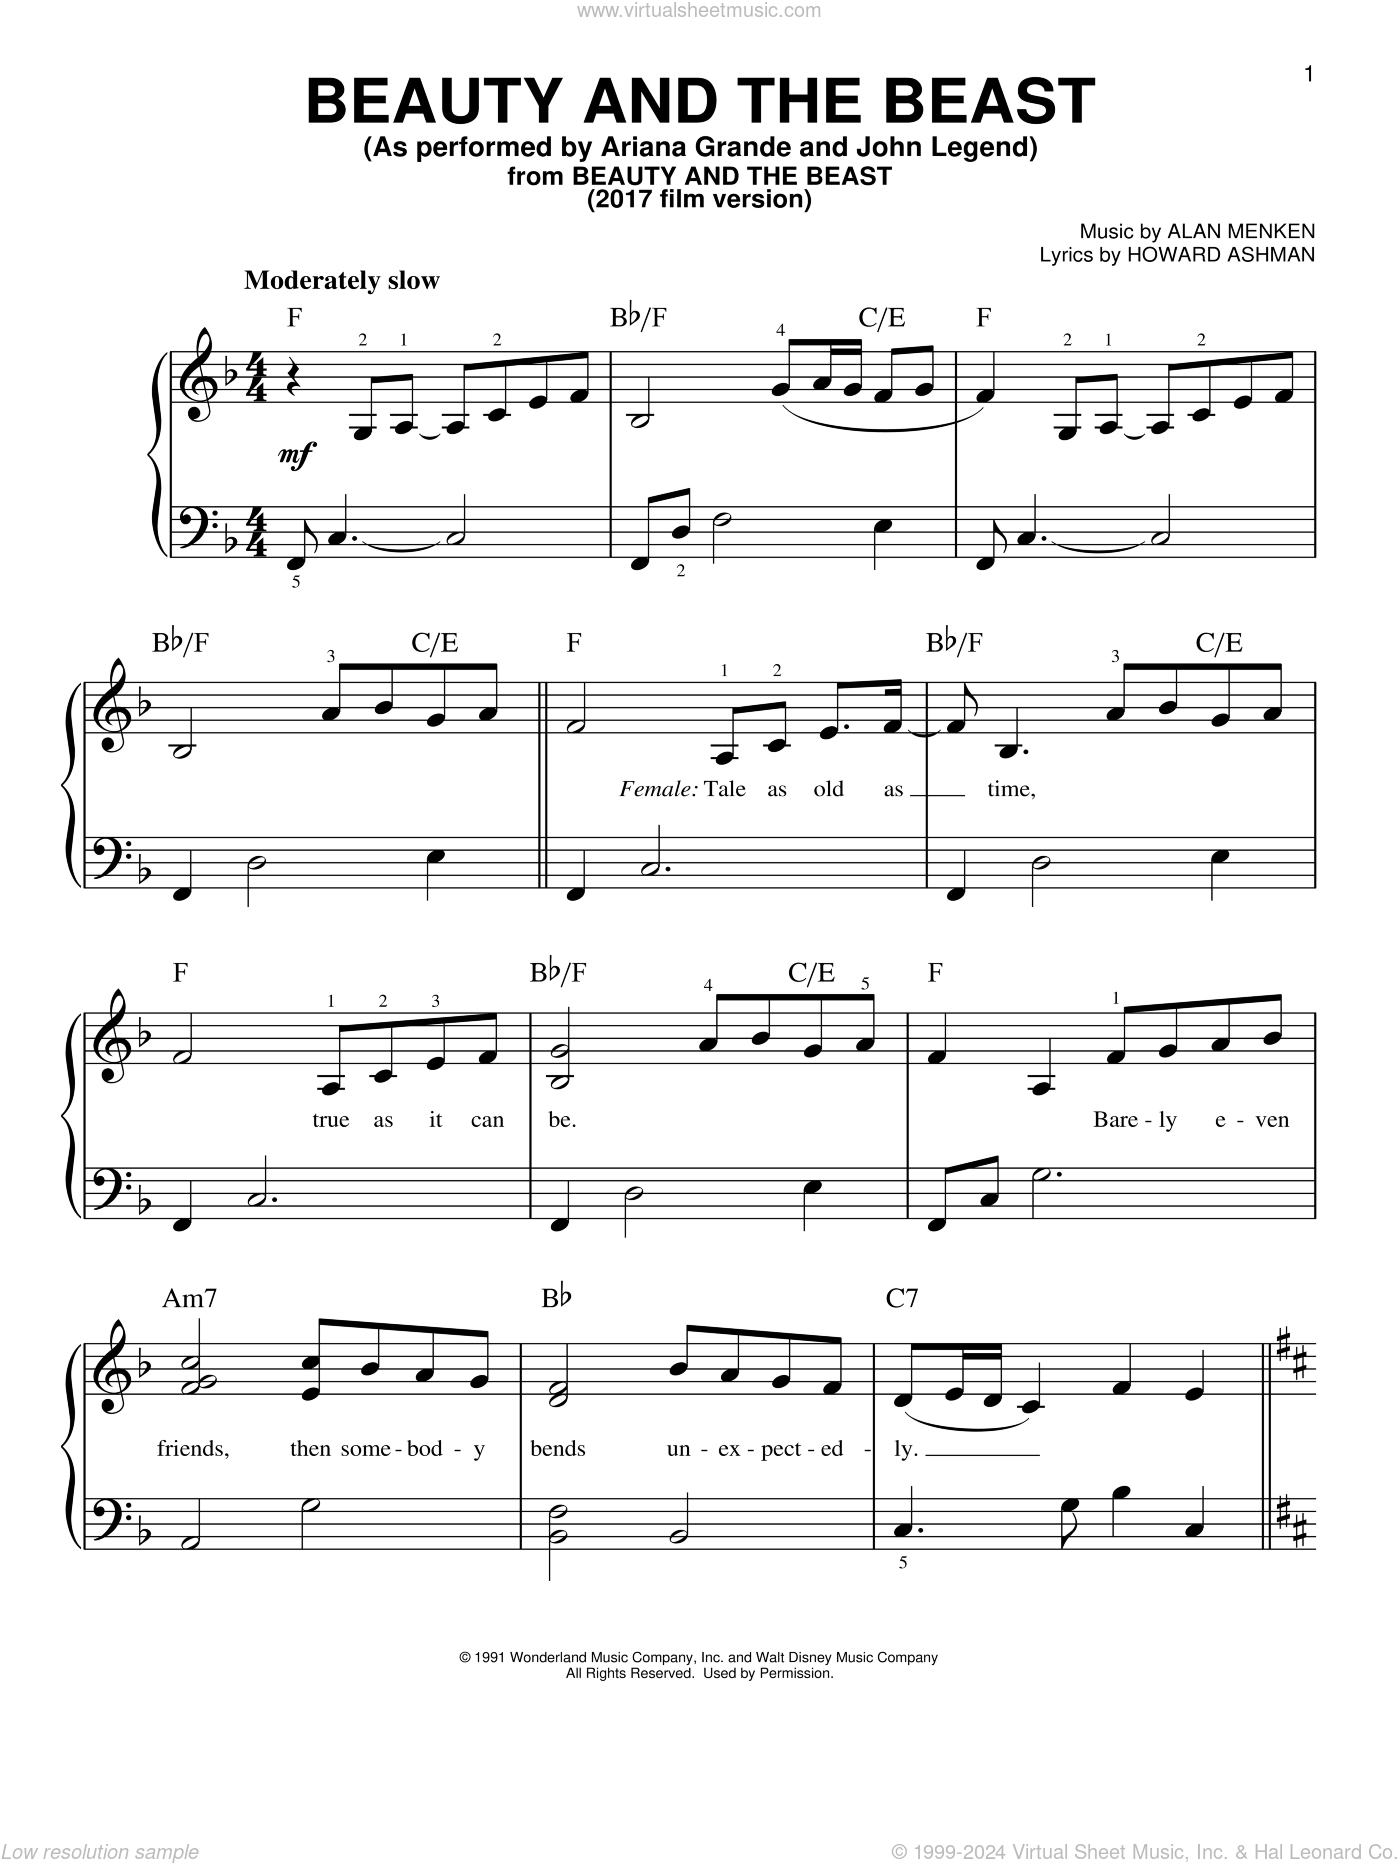 alan-menken-beauty-and-the-beast-sheet-music-notes-chords-download-printable-piano-solo-pdf